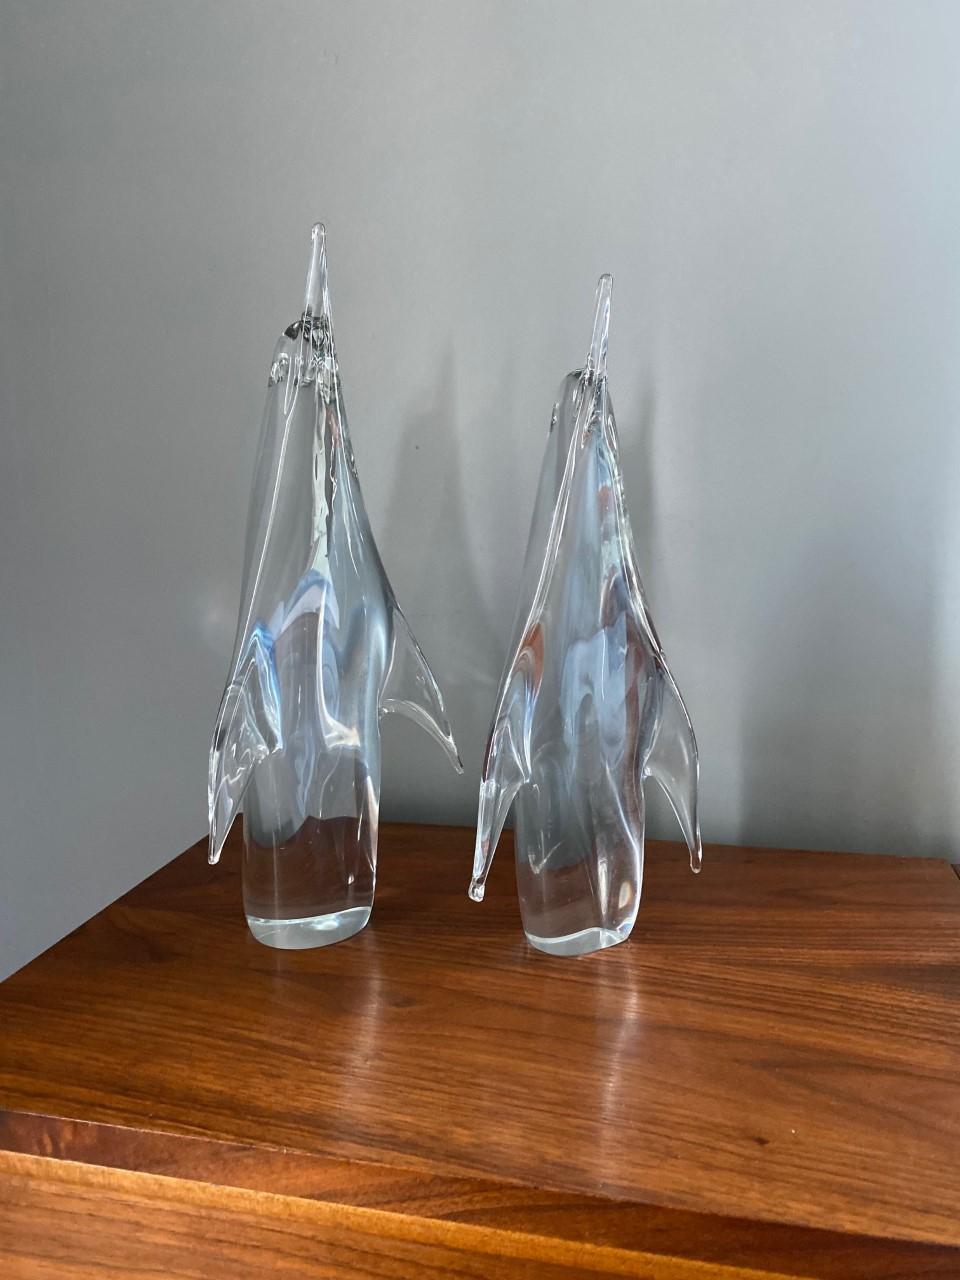 Stunning pair of Scandinavian full lead crystal clear glass penguin sculptures. Made by FM Konstglas (which later became Marcolin Art Crystal) of Ronneby, Sweden. These pieces are whimsical and stylish. Evocative sculptures that are warming and